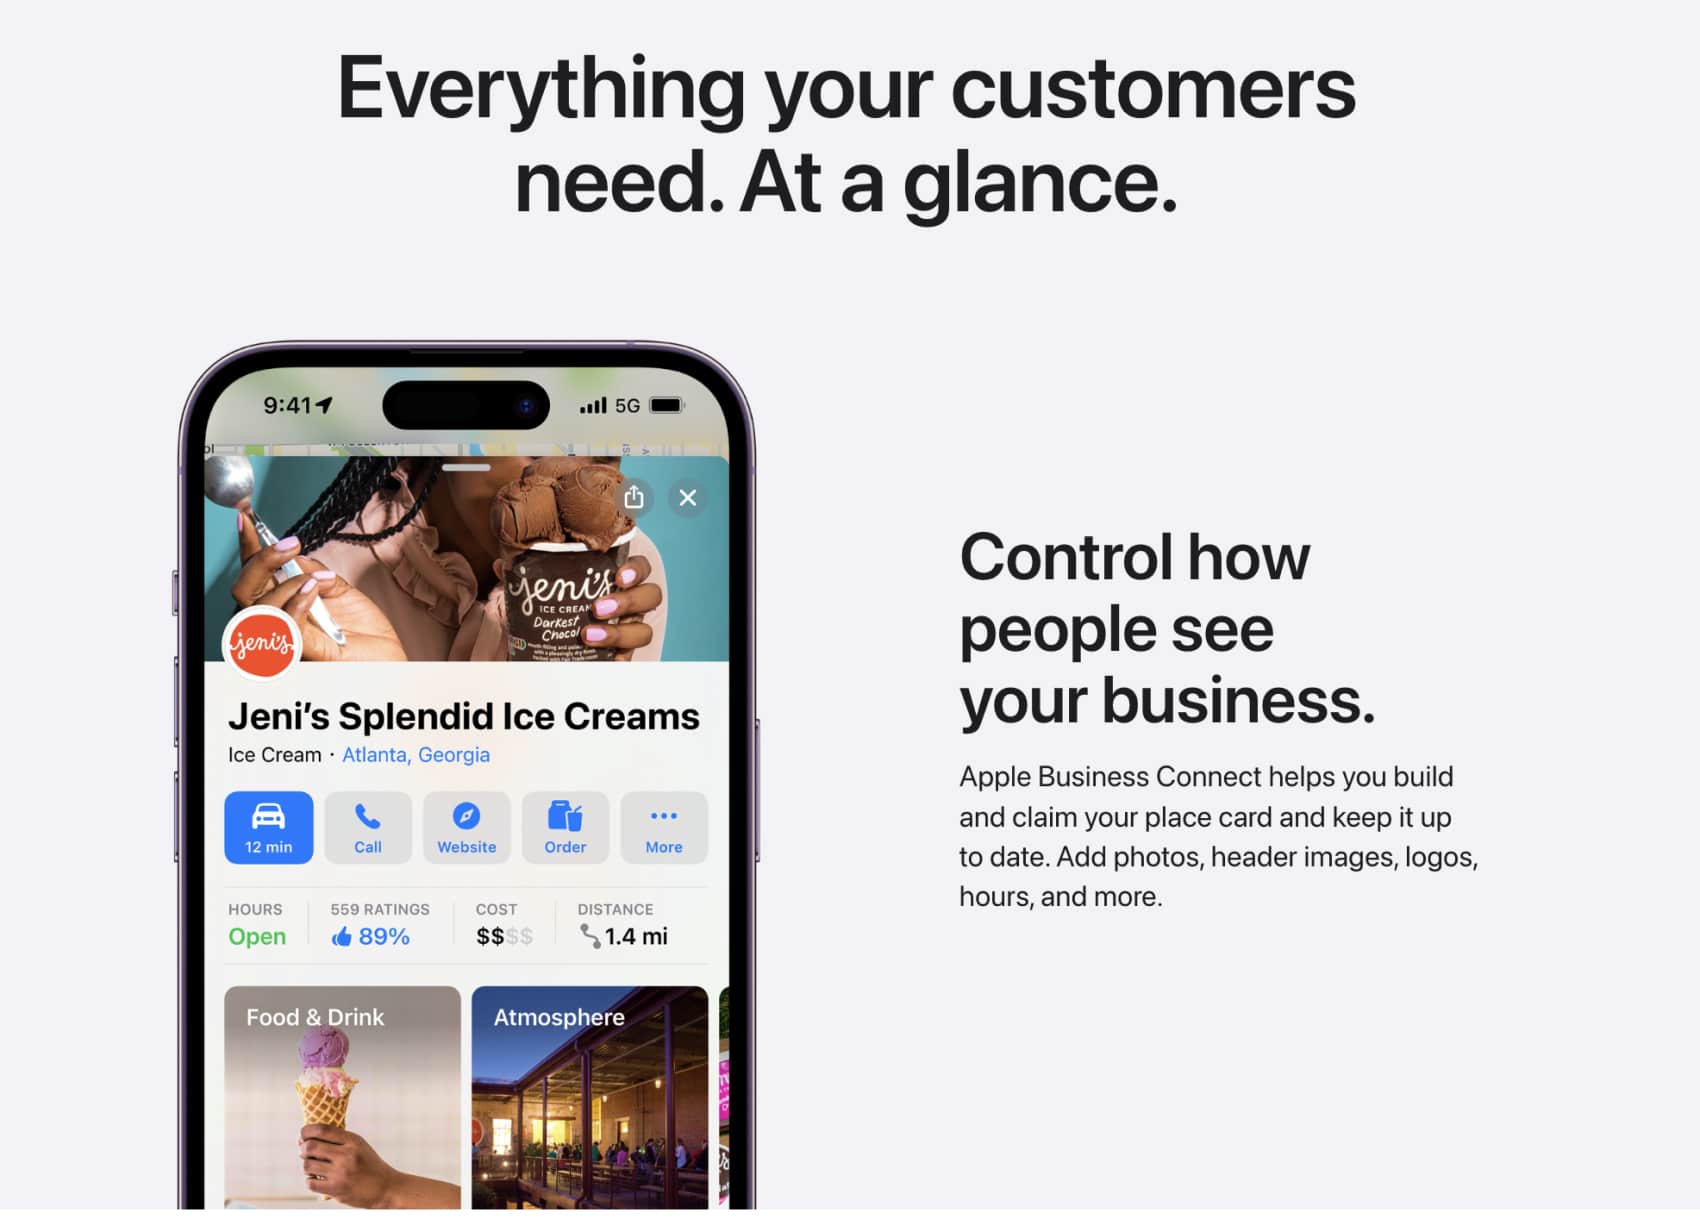 What Apple Business Connect offers